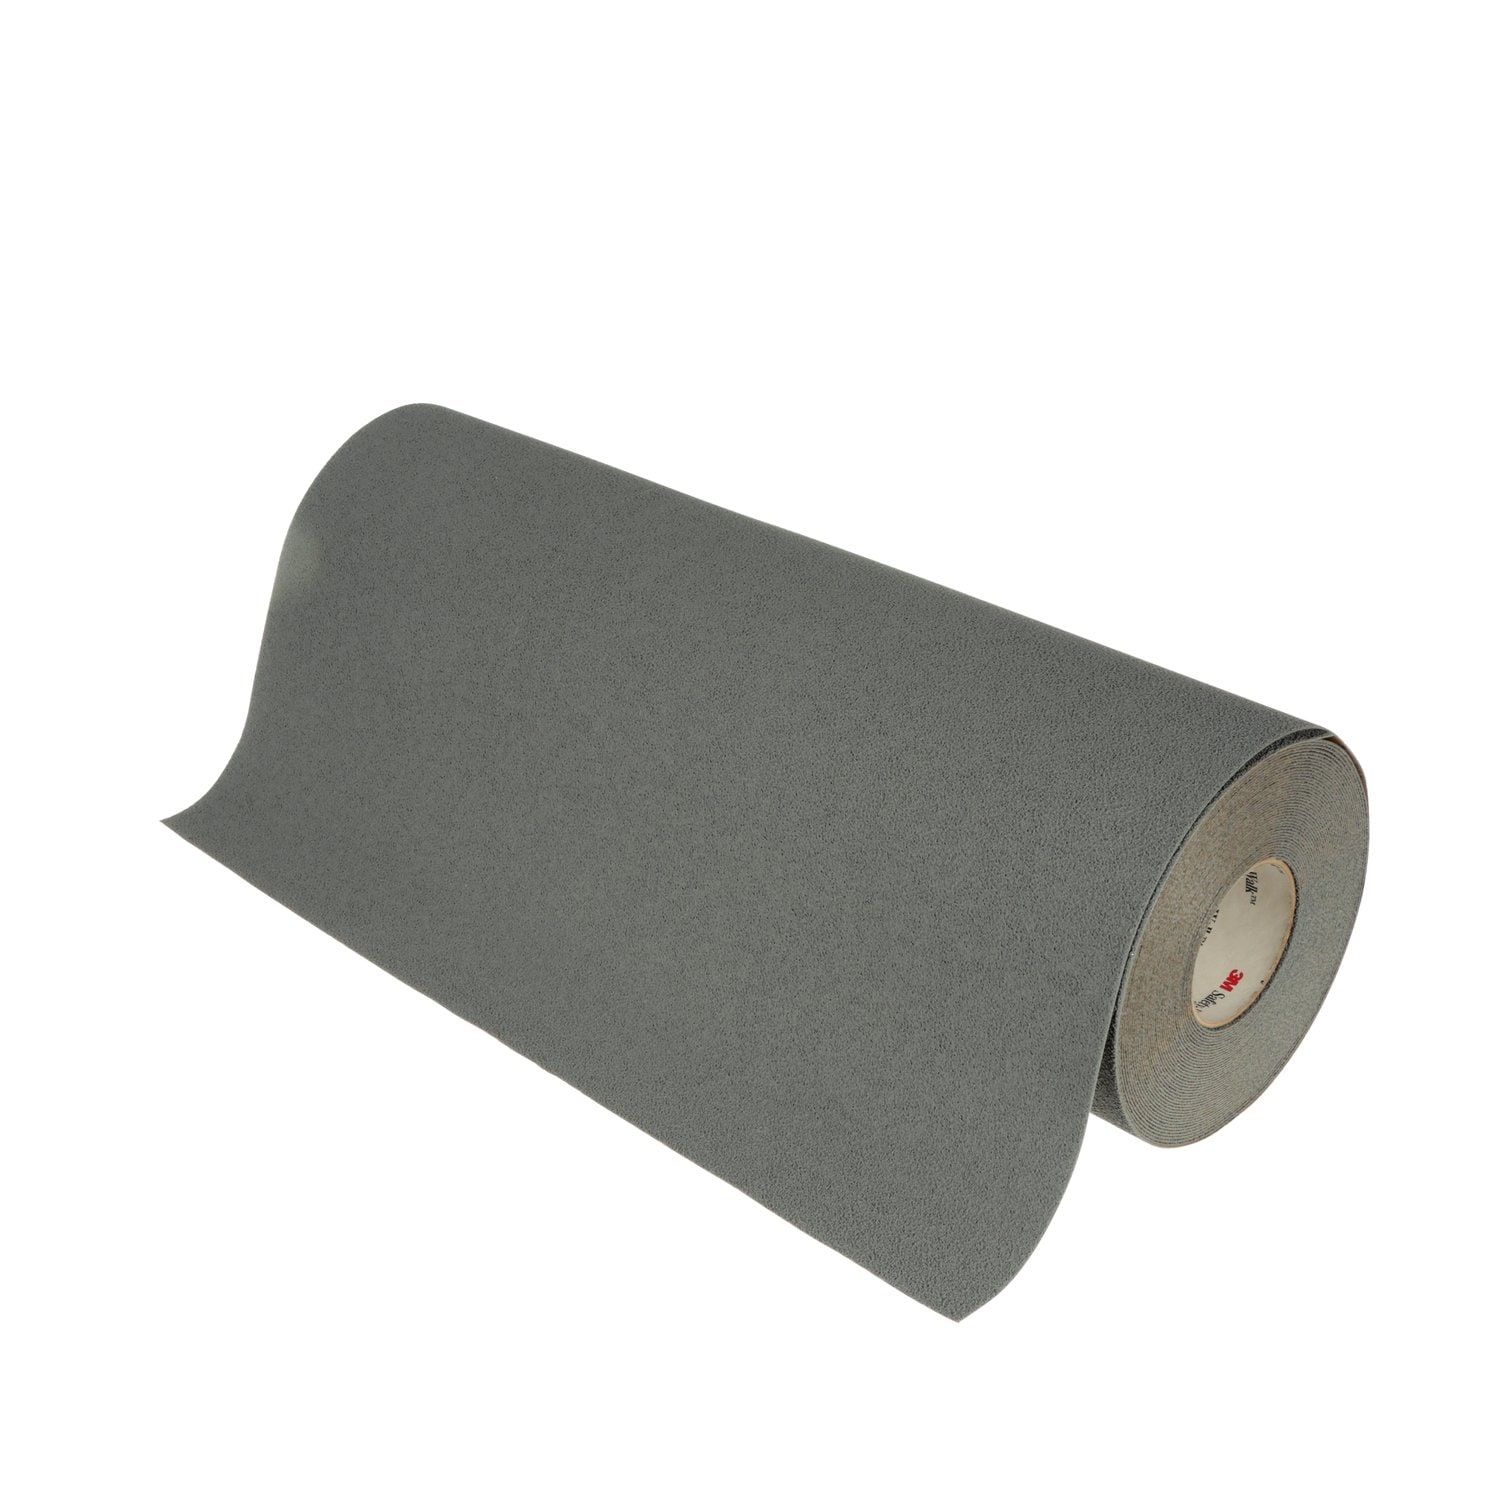 7100189310 - 3M Safety Walk Slip-Resistent Medium Resilient Tapes & Treads 370,
Gray, 49.25 in x 100 yd